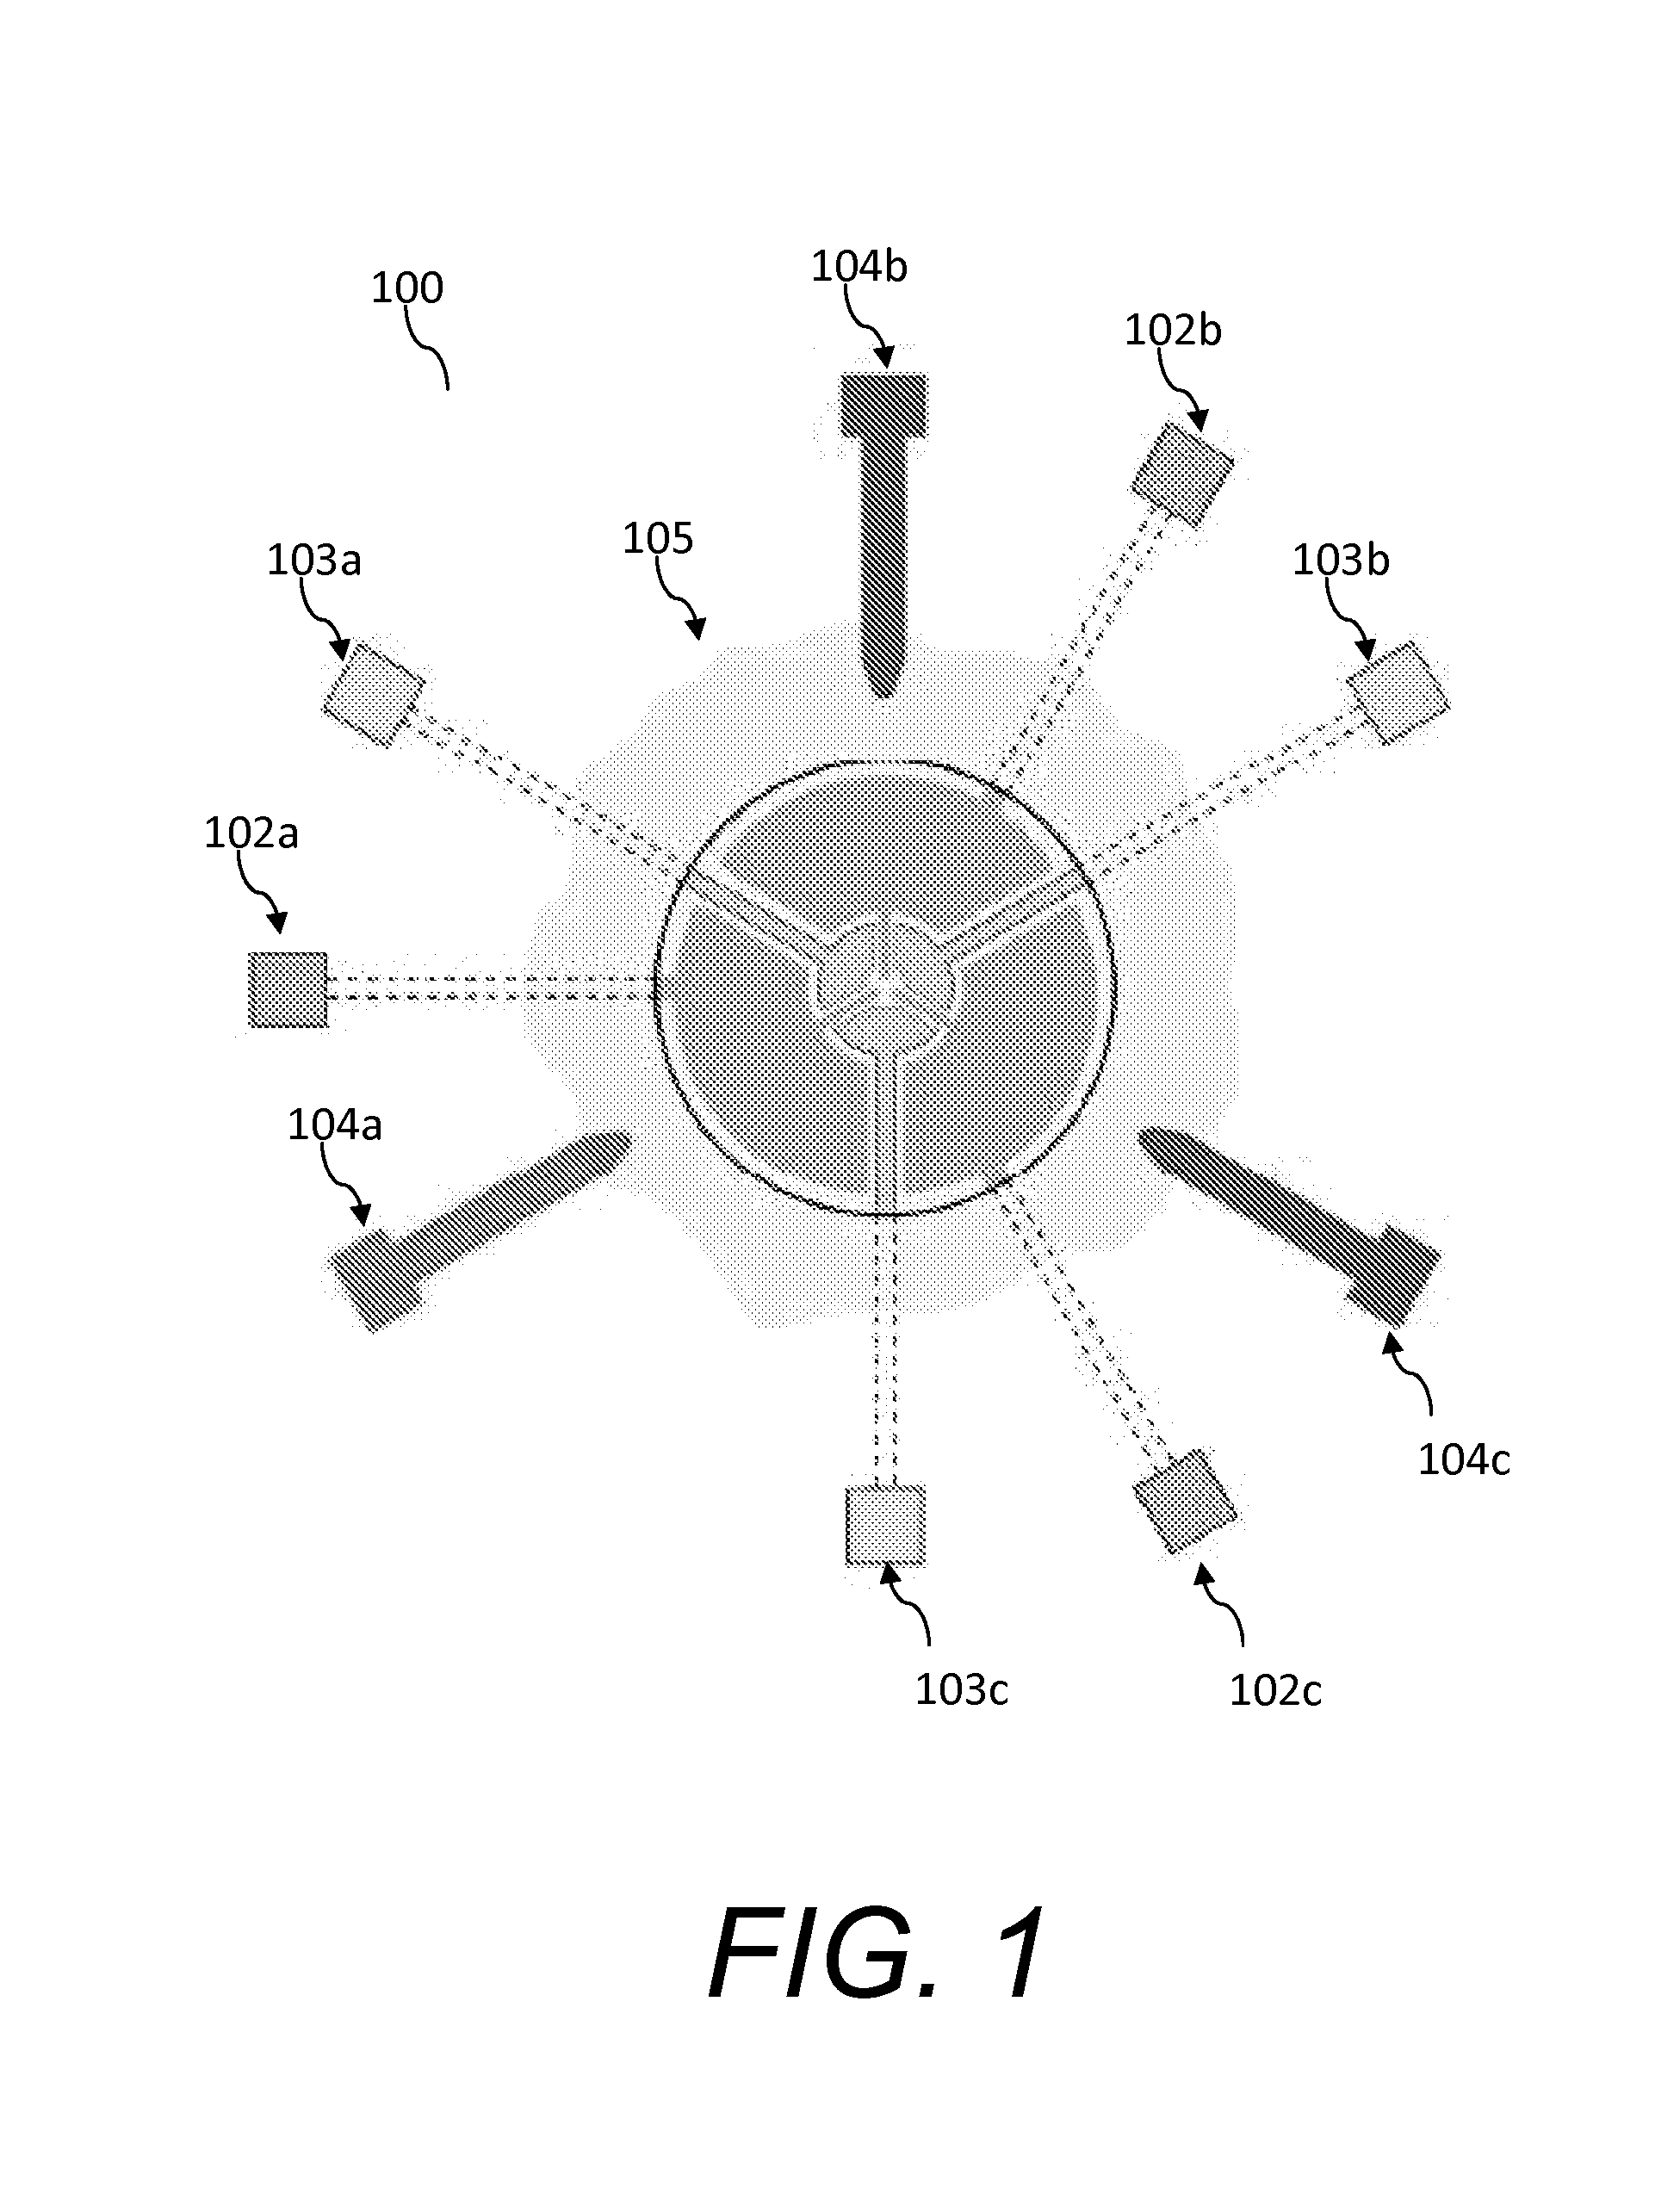 Membrane-Based Nano-Electromechanical Systems Device And Methods To Make And Use Same